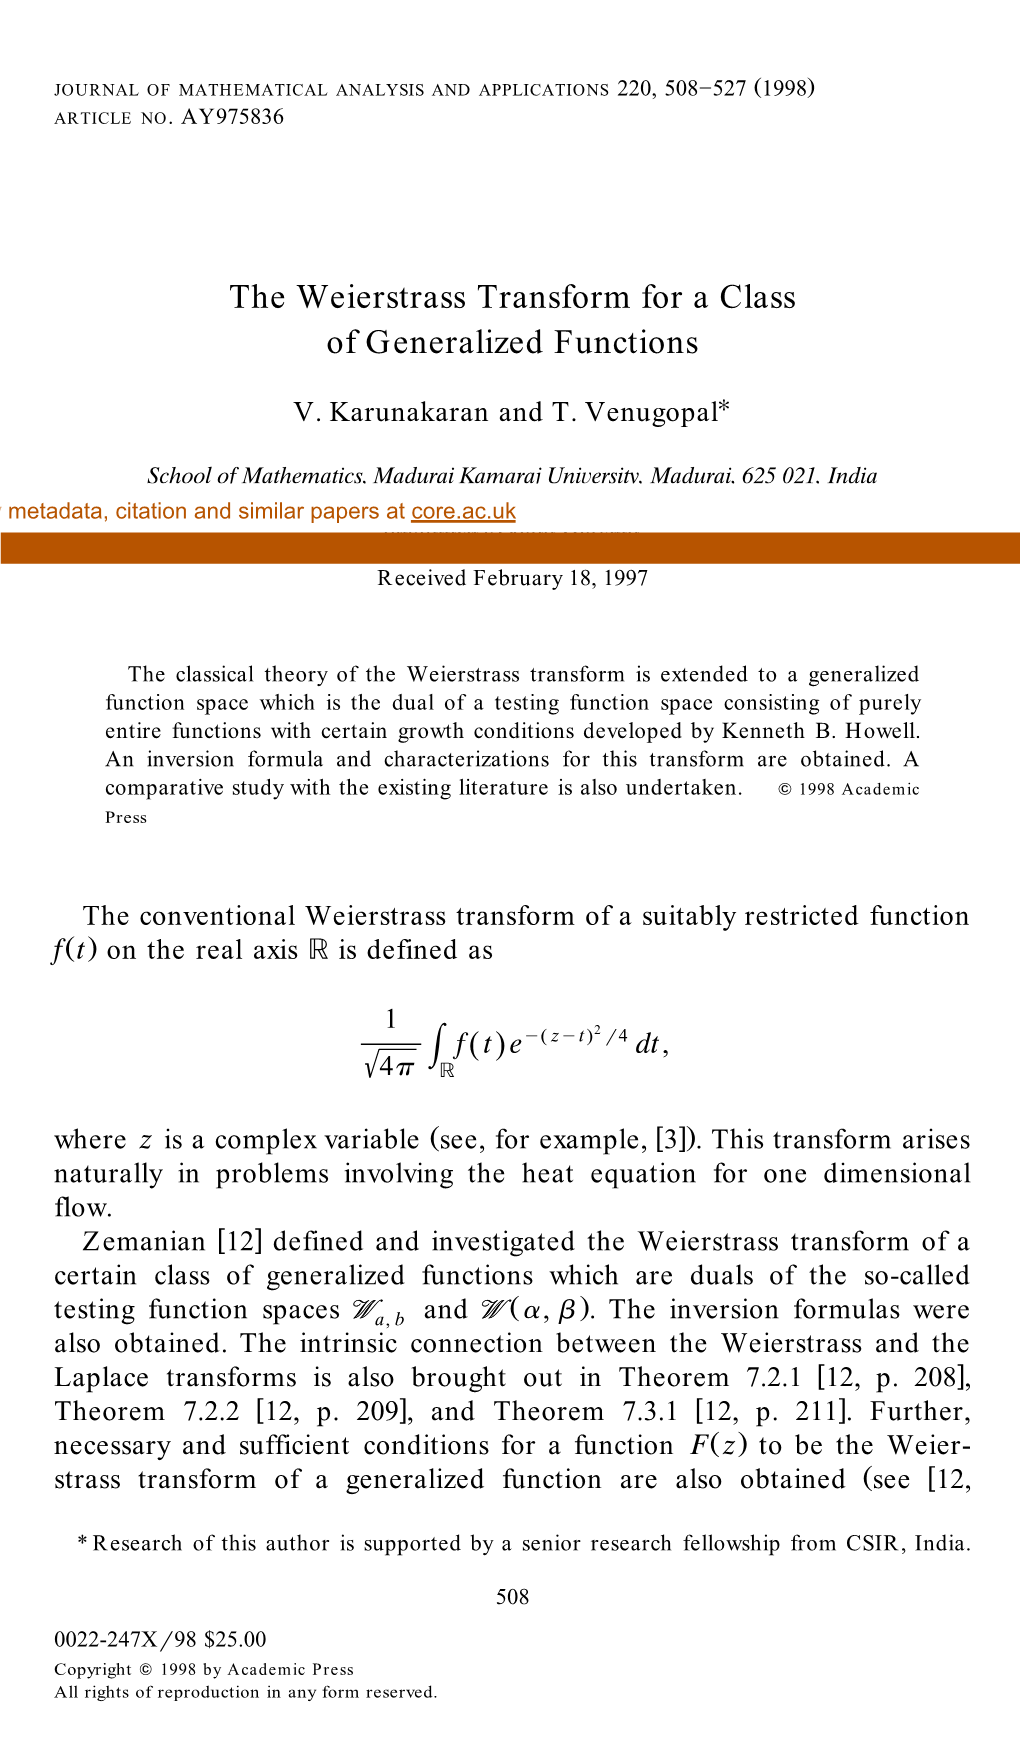 The Weierstrass Transform for a Class of Generalized Functions